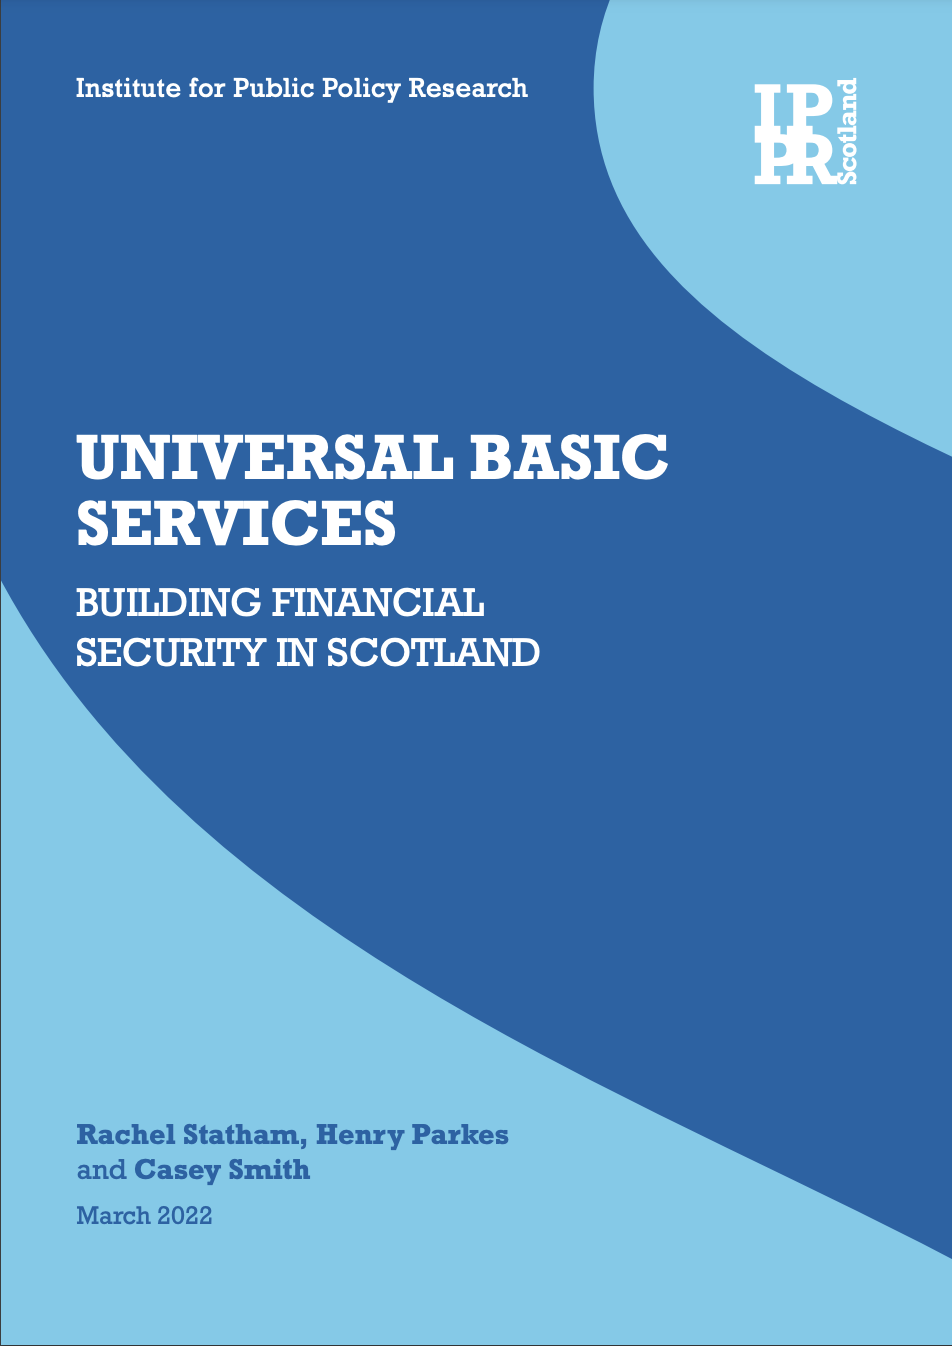 Universal basic services: Building financial security in Scotland